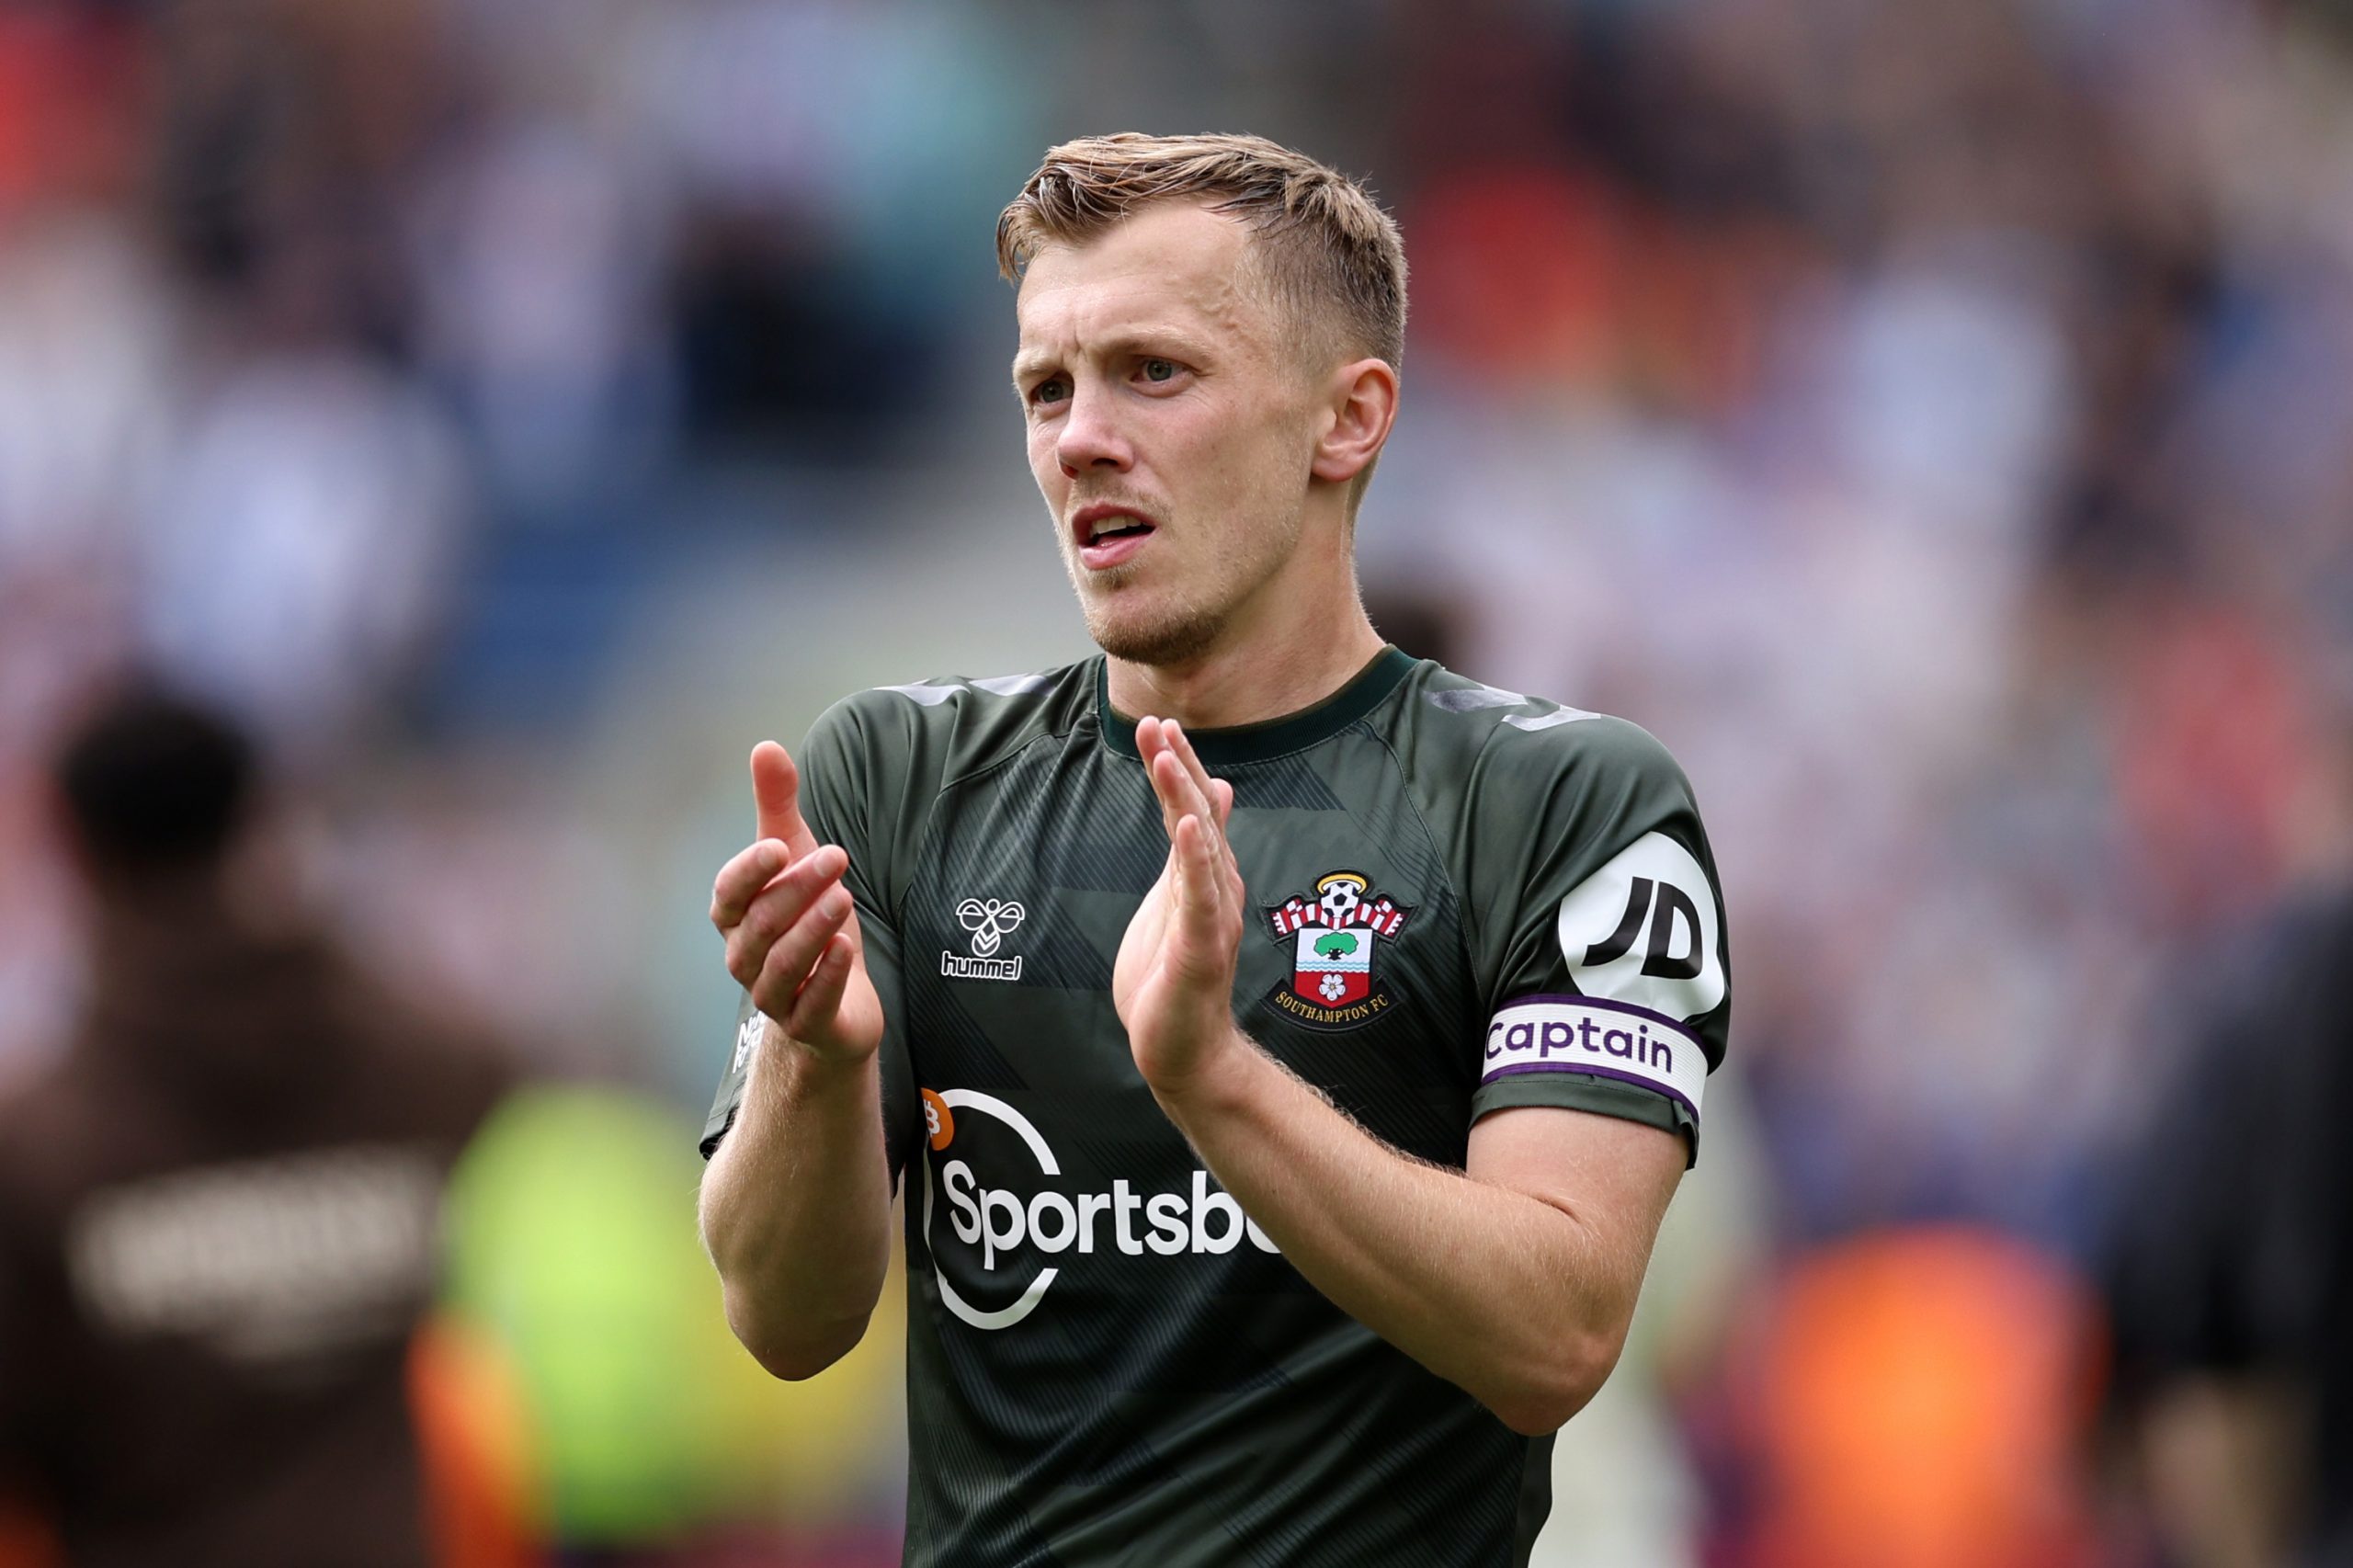 Arsenal and Tottenham Hotspur are interested in Southampton midfielder James Ward-Prowse.